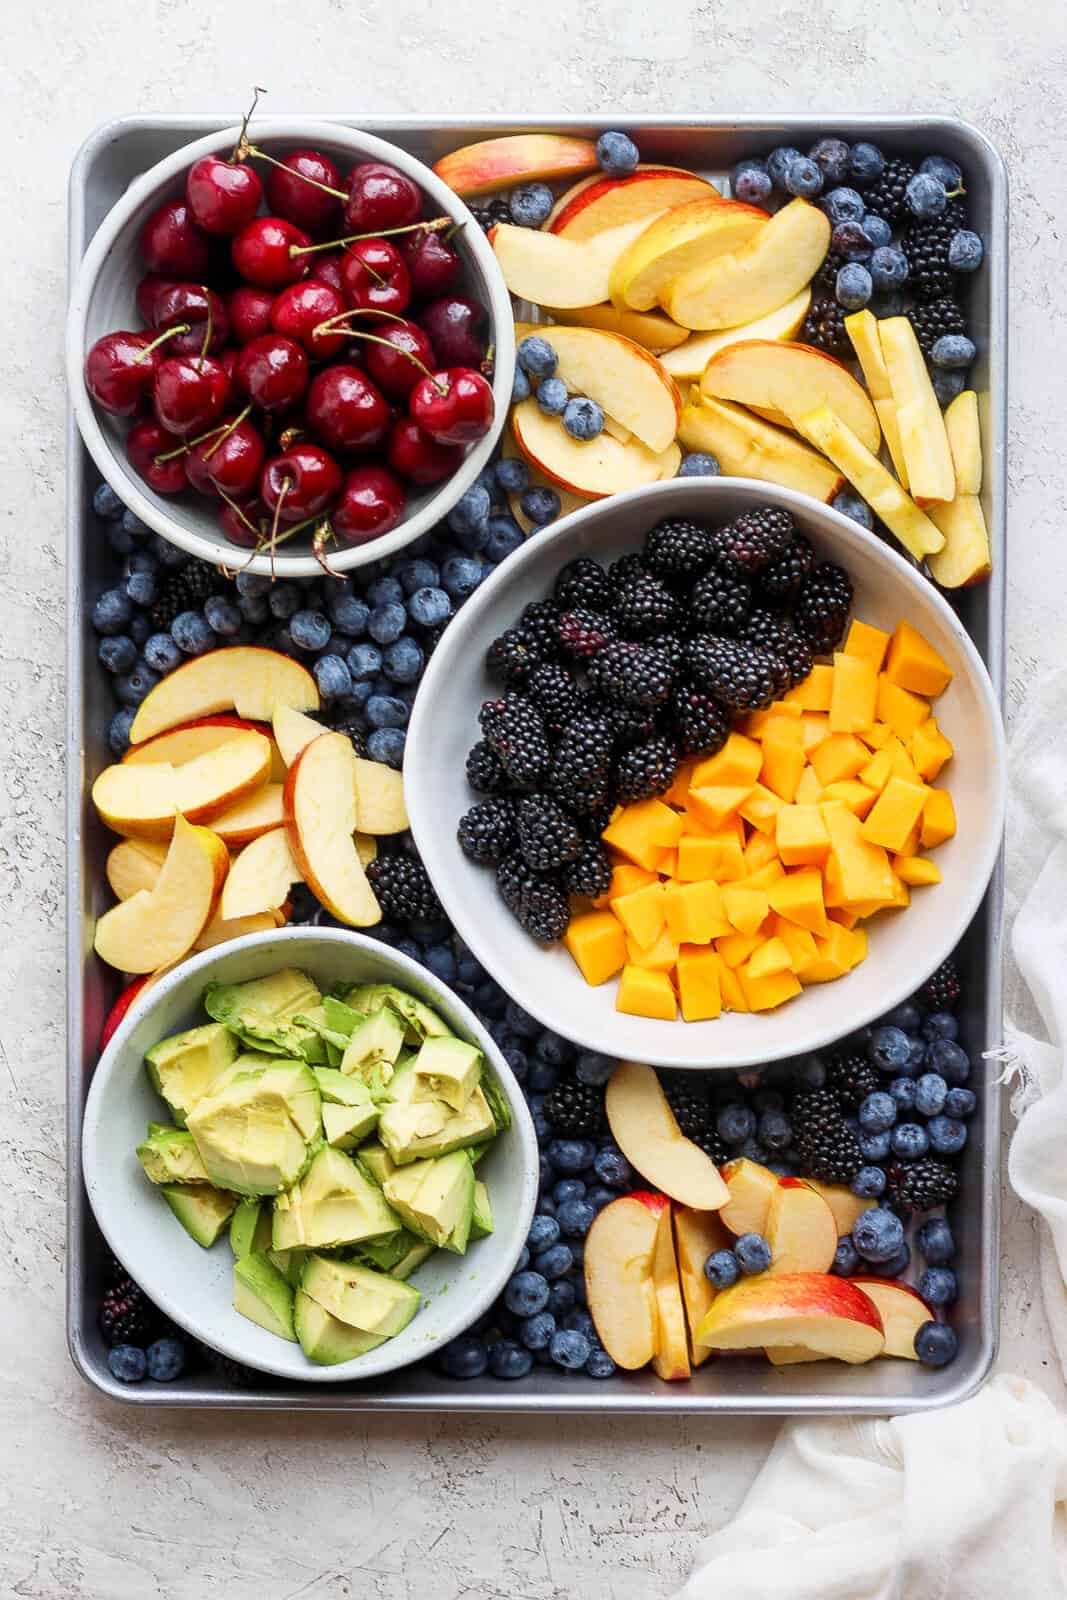 A baking sheet with cherries, blackberries, blueberries, cut up mango, apples, and avocado.